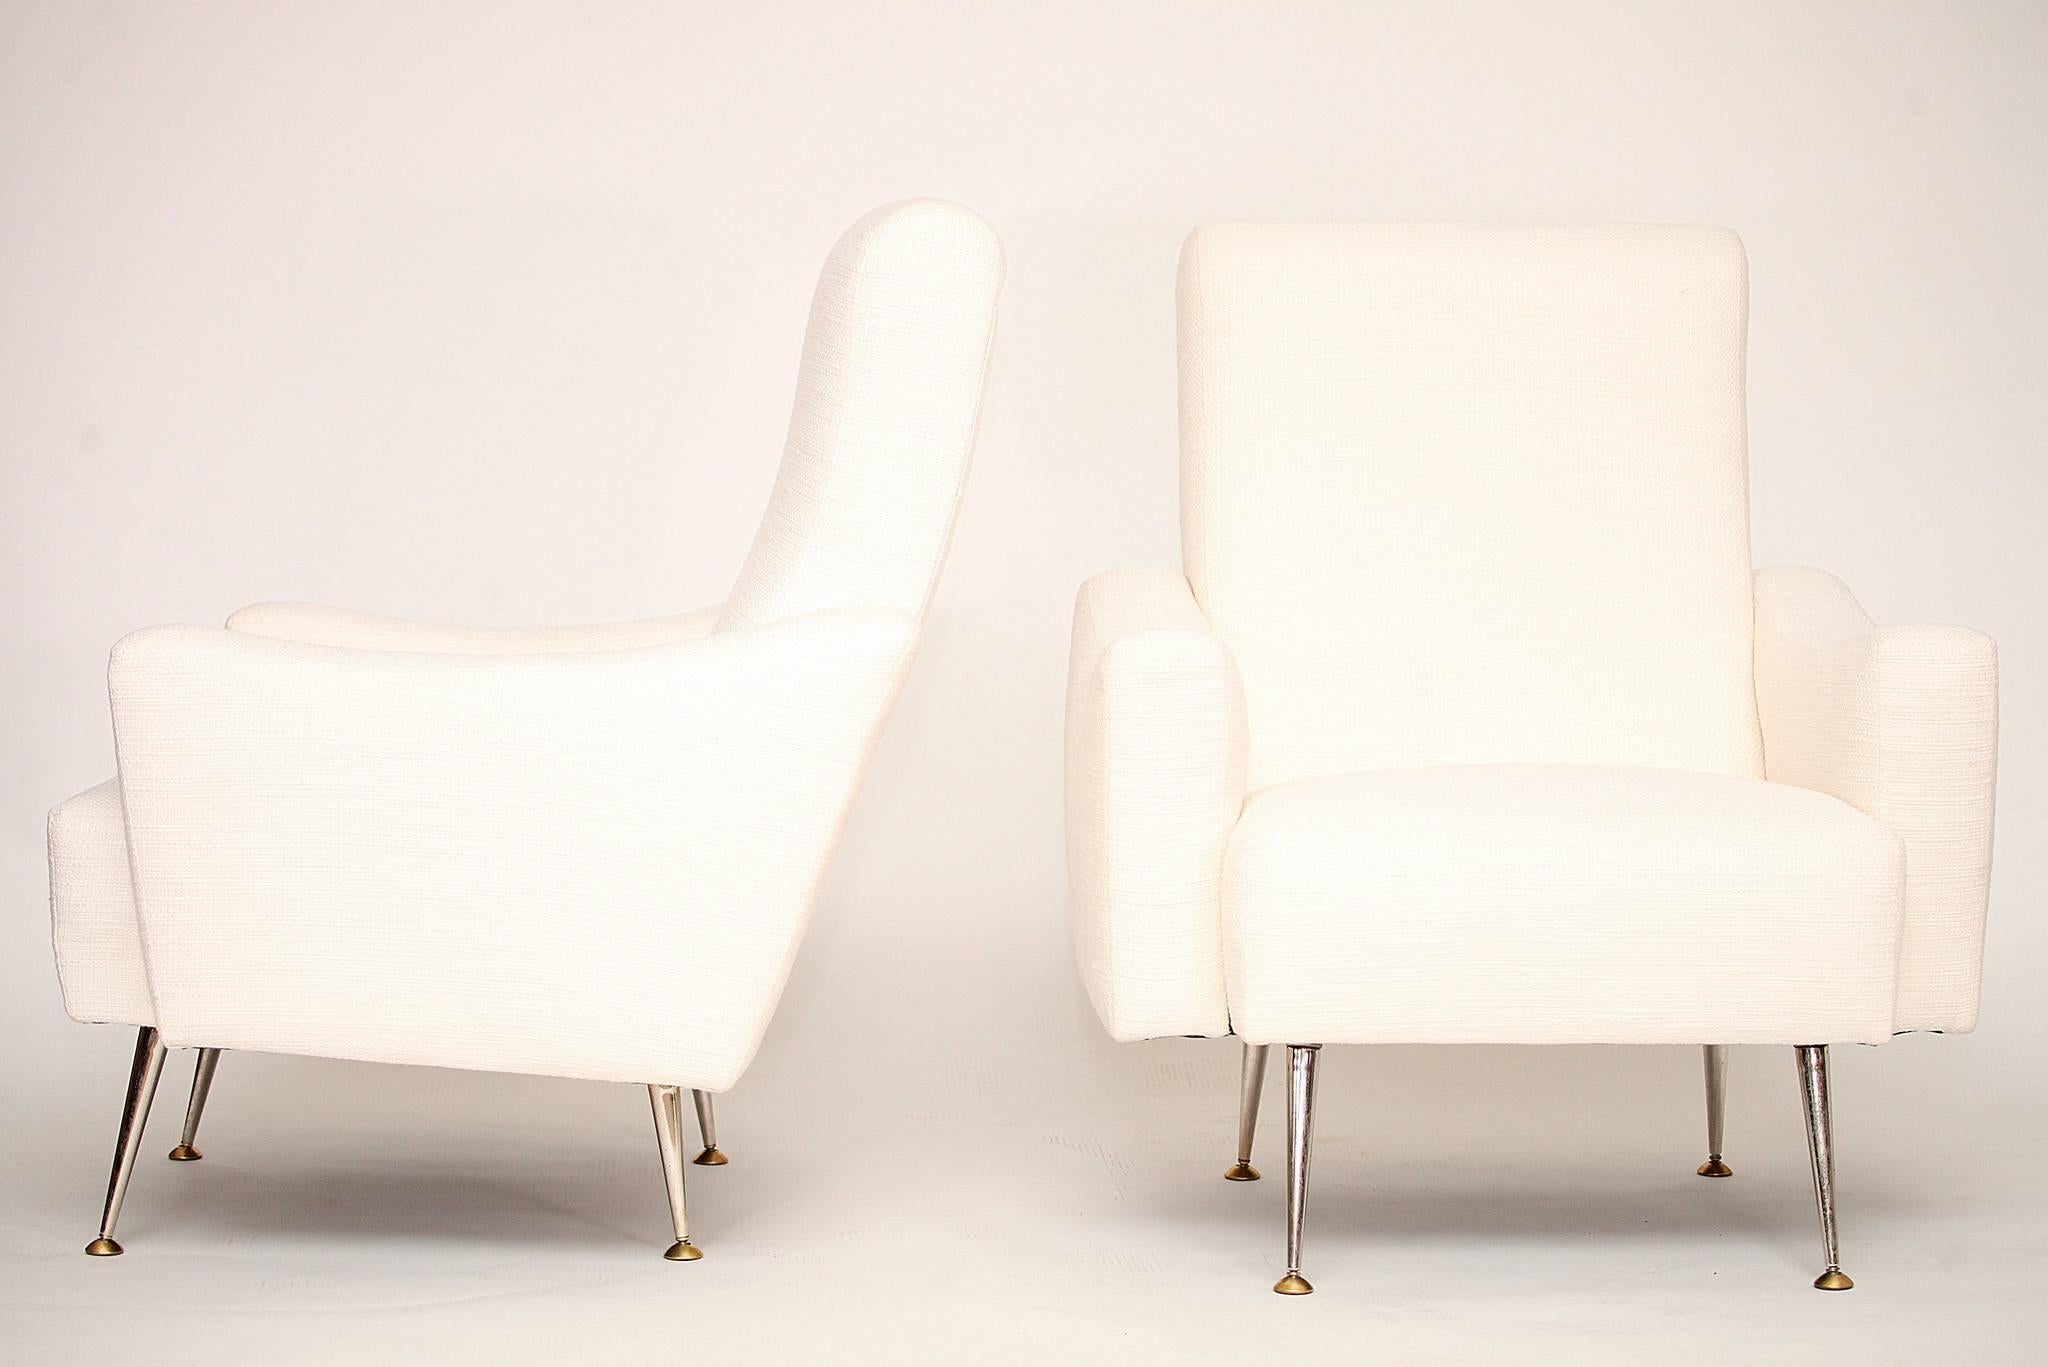 A sculptural pair of 1950s Italian armchairs newly upholstered in a tweed woven white linen blend with brass legs.